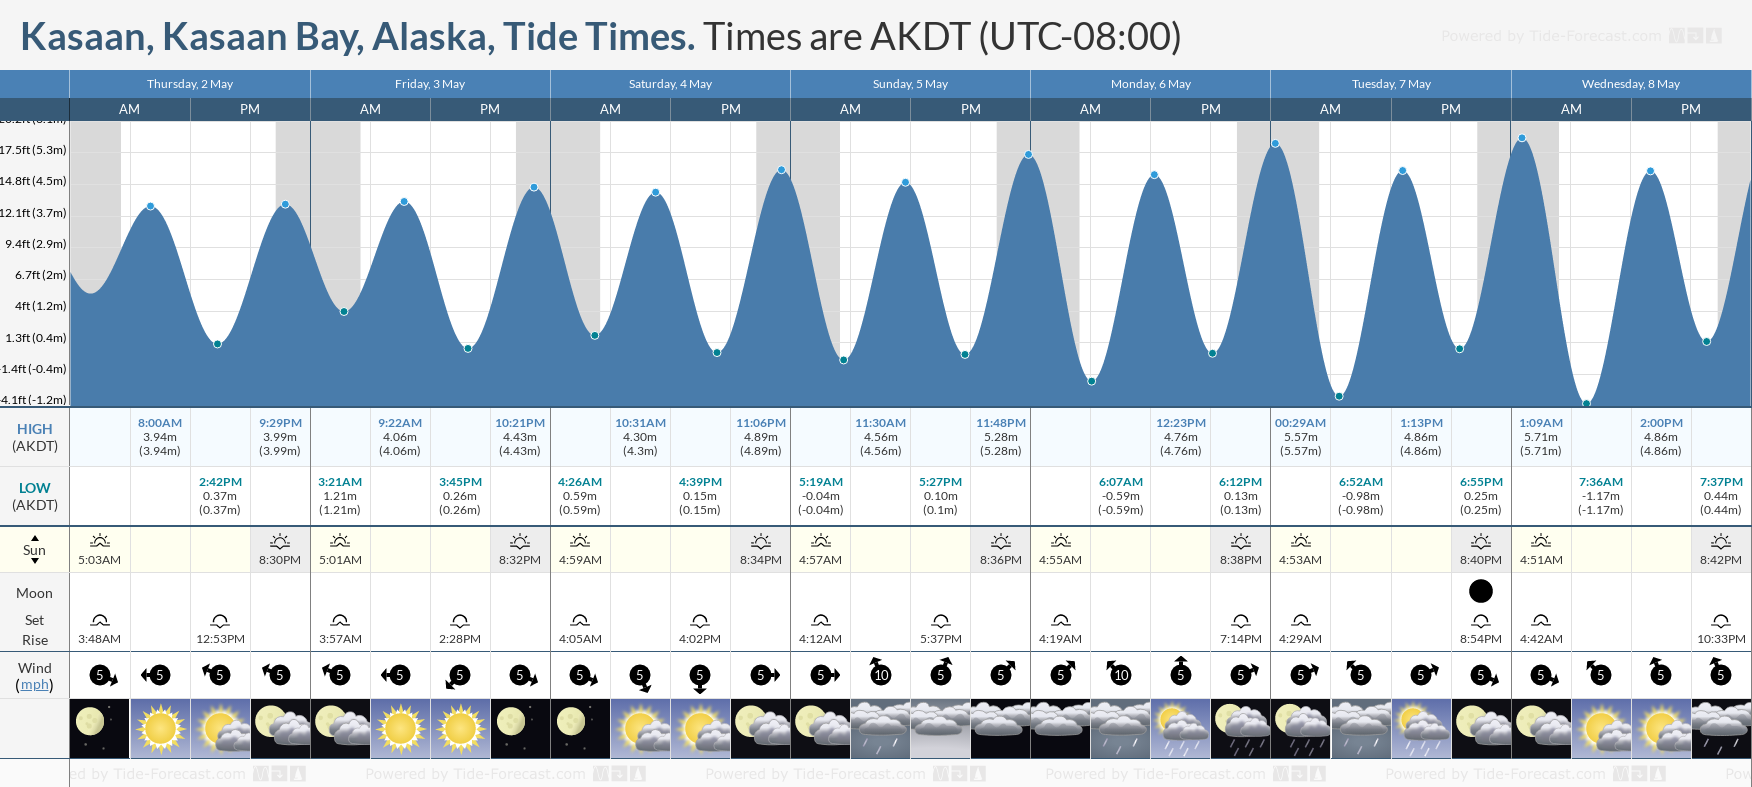 Kasaan, Kasaan Bay, Alaska Tide Chart including high and low tide tide times for the next 7 days